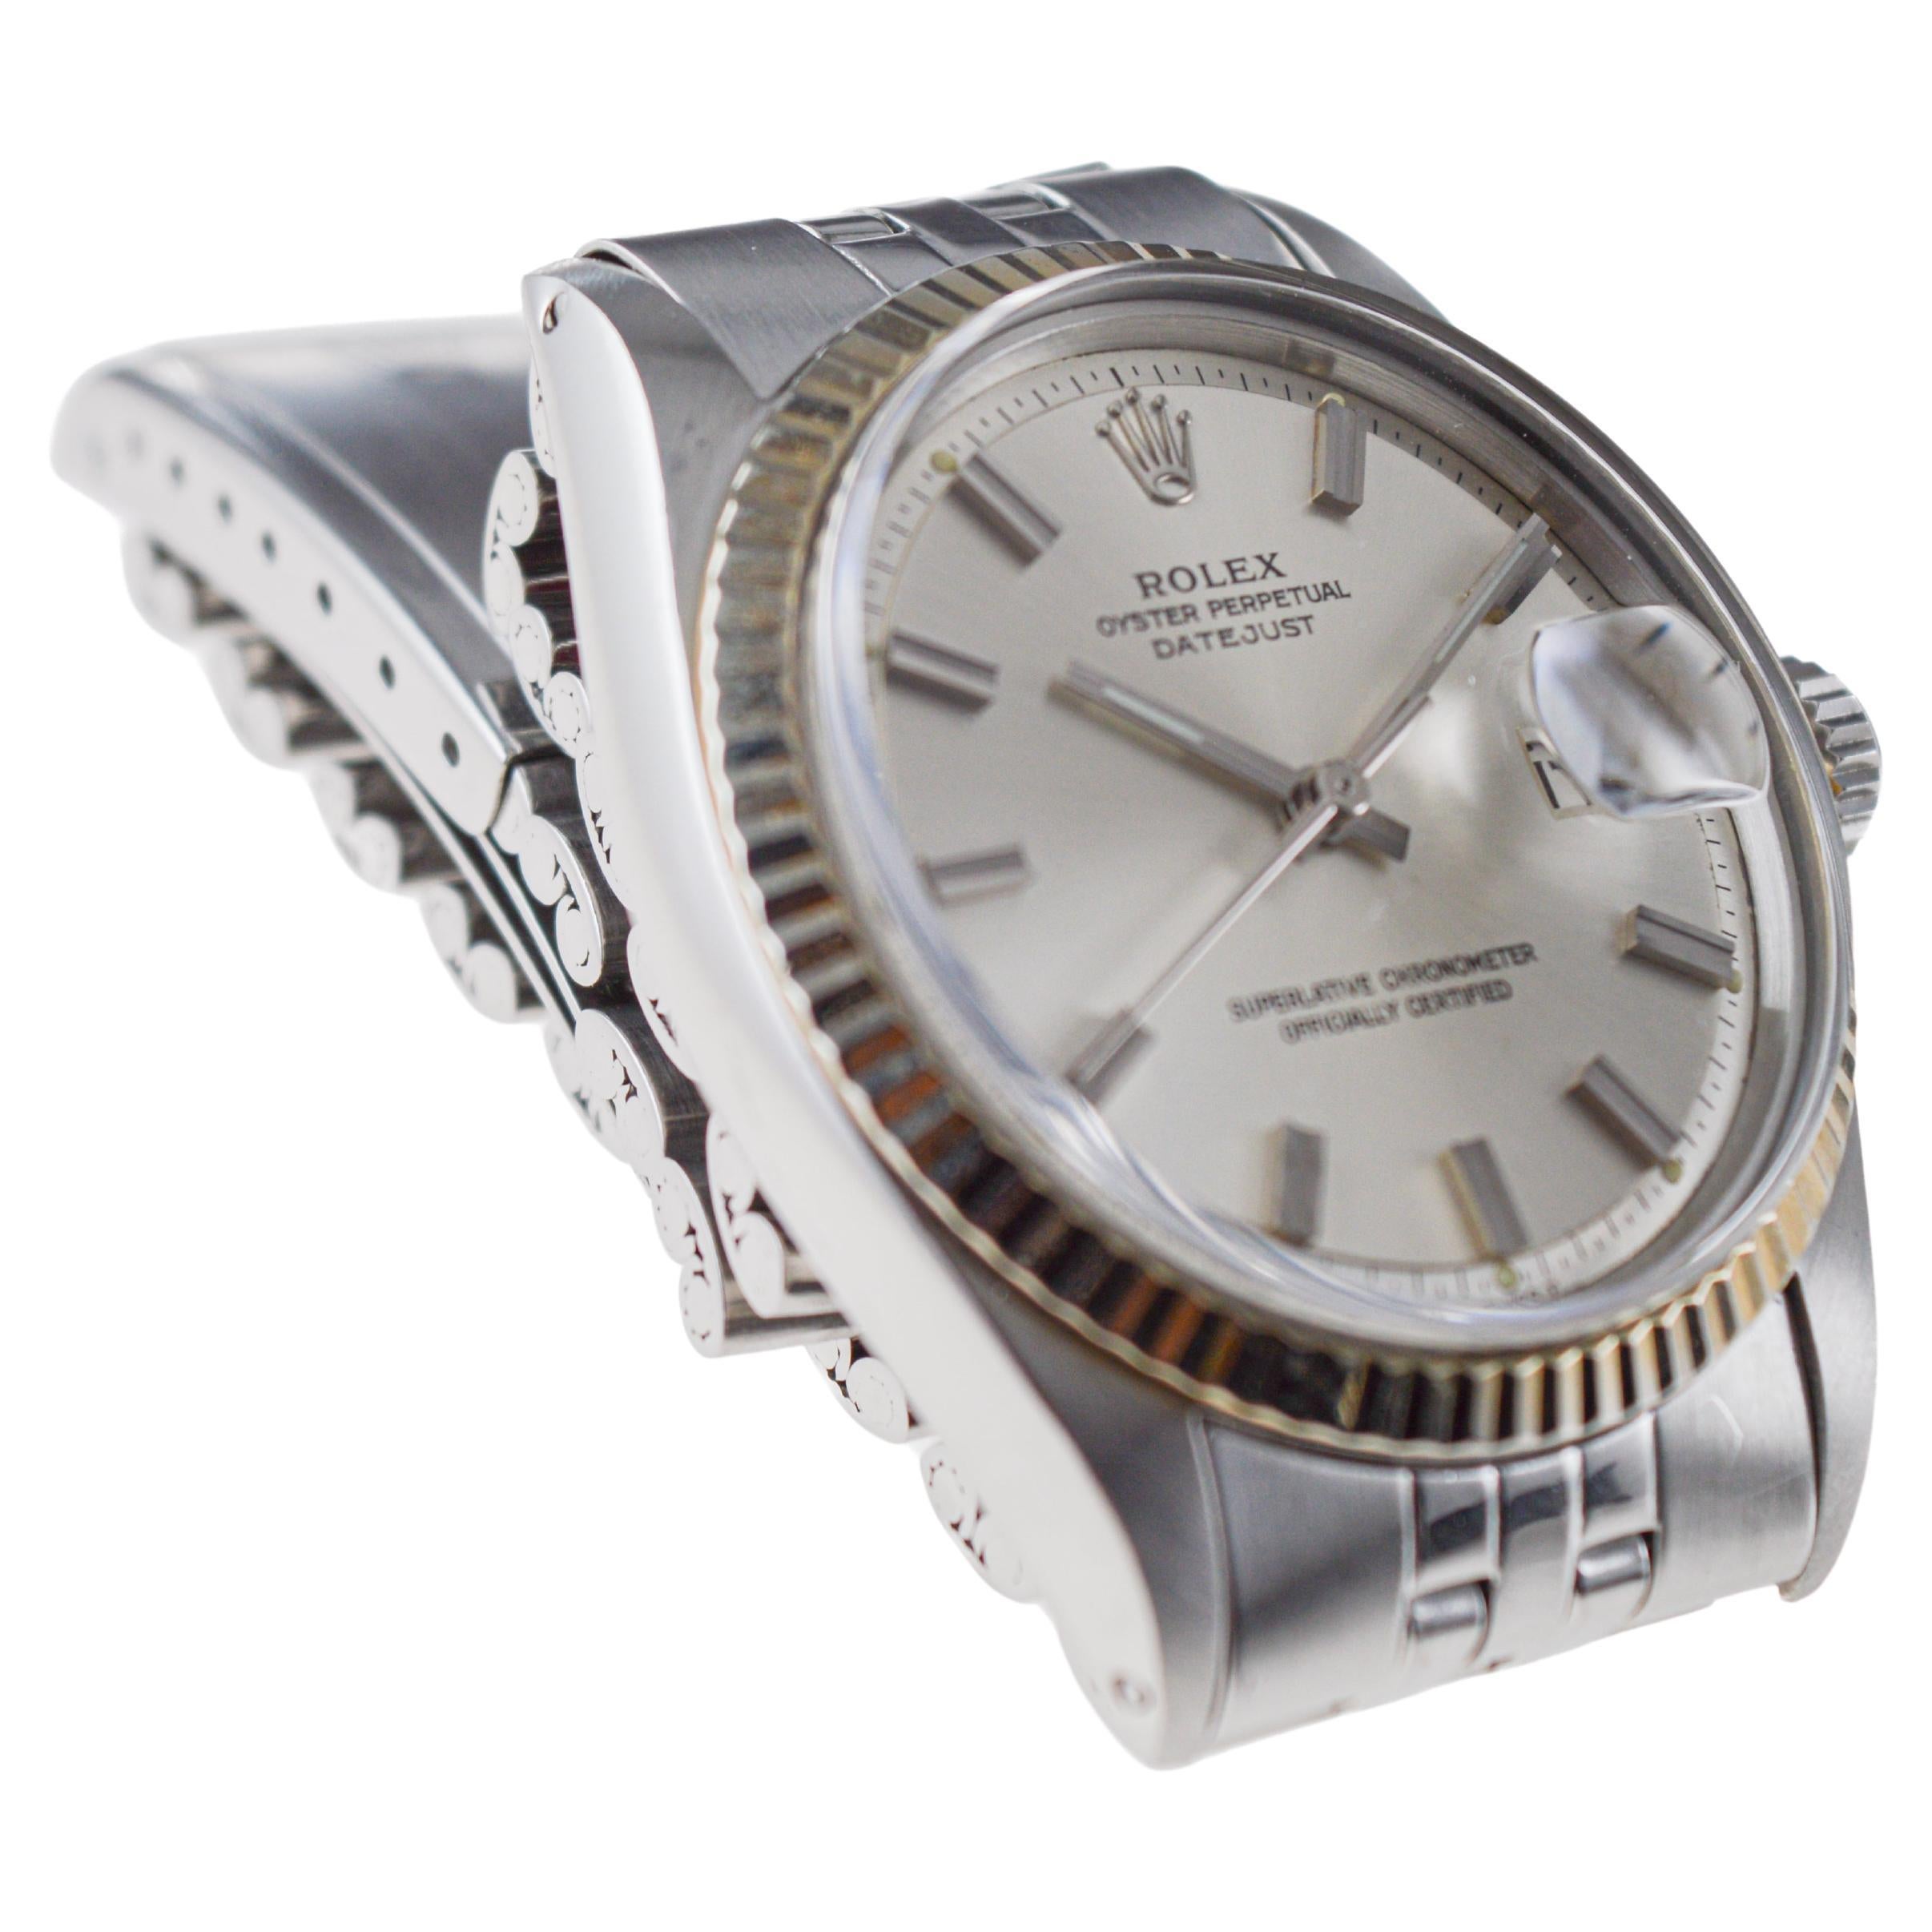 Rolex Steel Datejust with Original Silvered Dial And Papers circa, 1970's For Sale 2